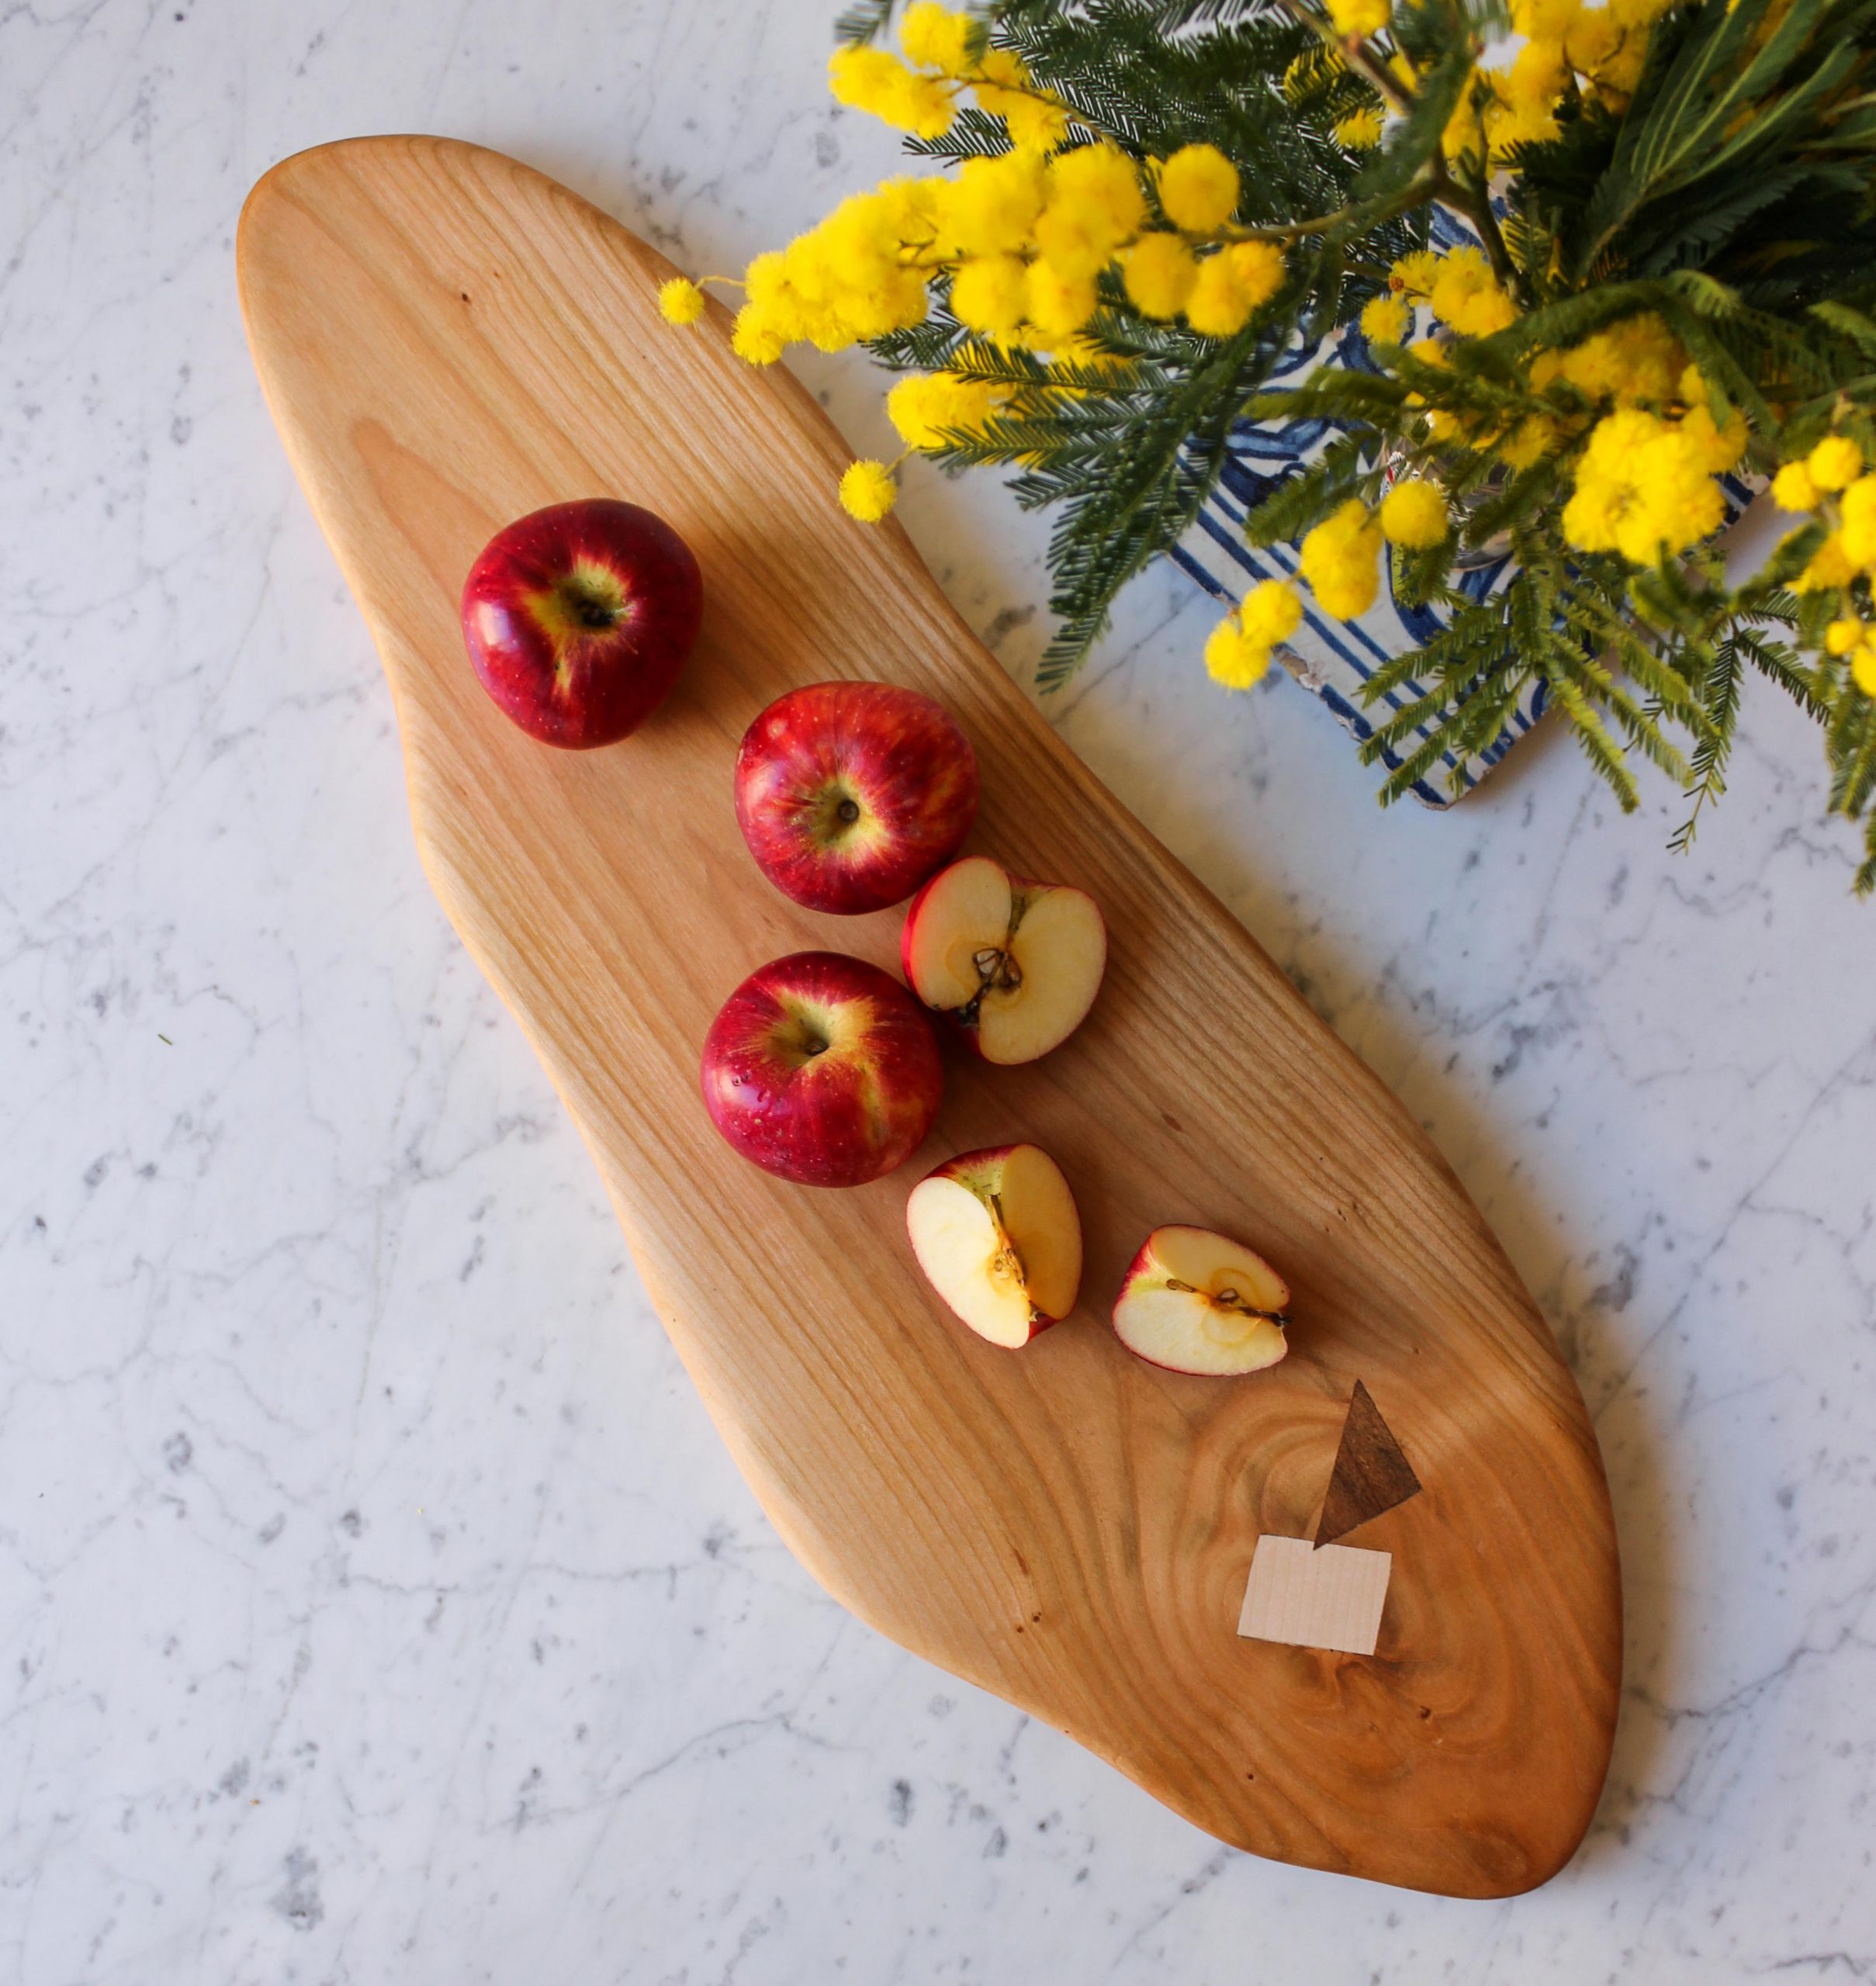 Cherry cheeseboard with inlays on both sides